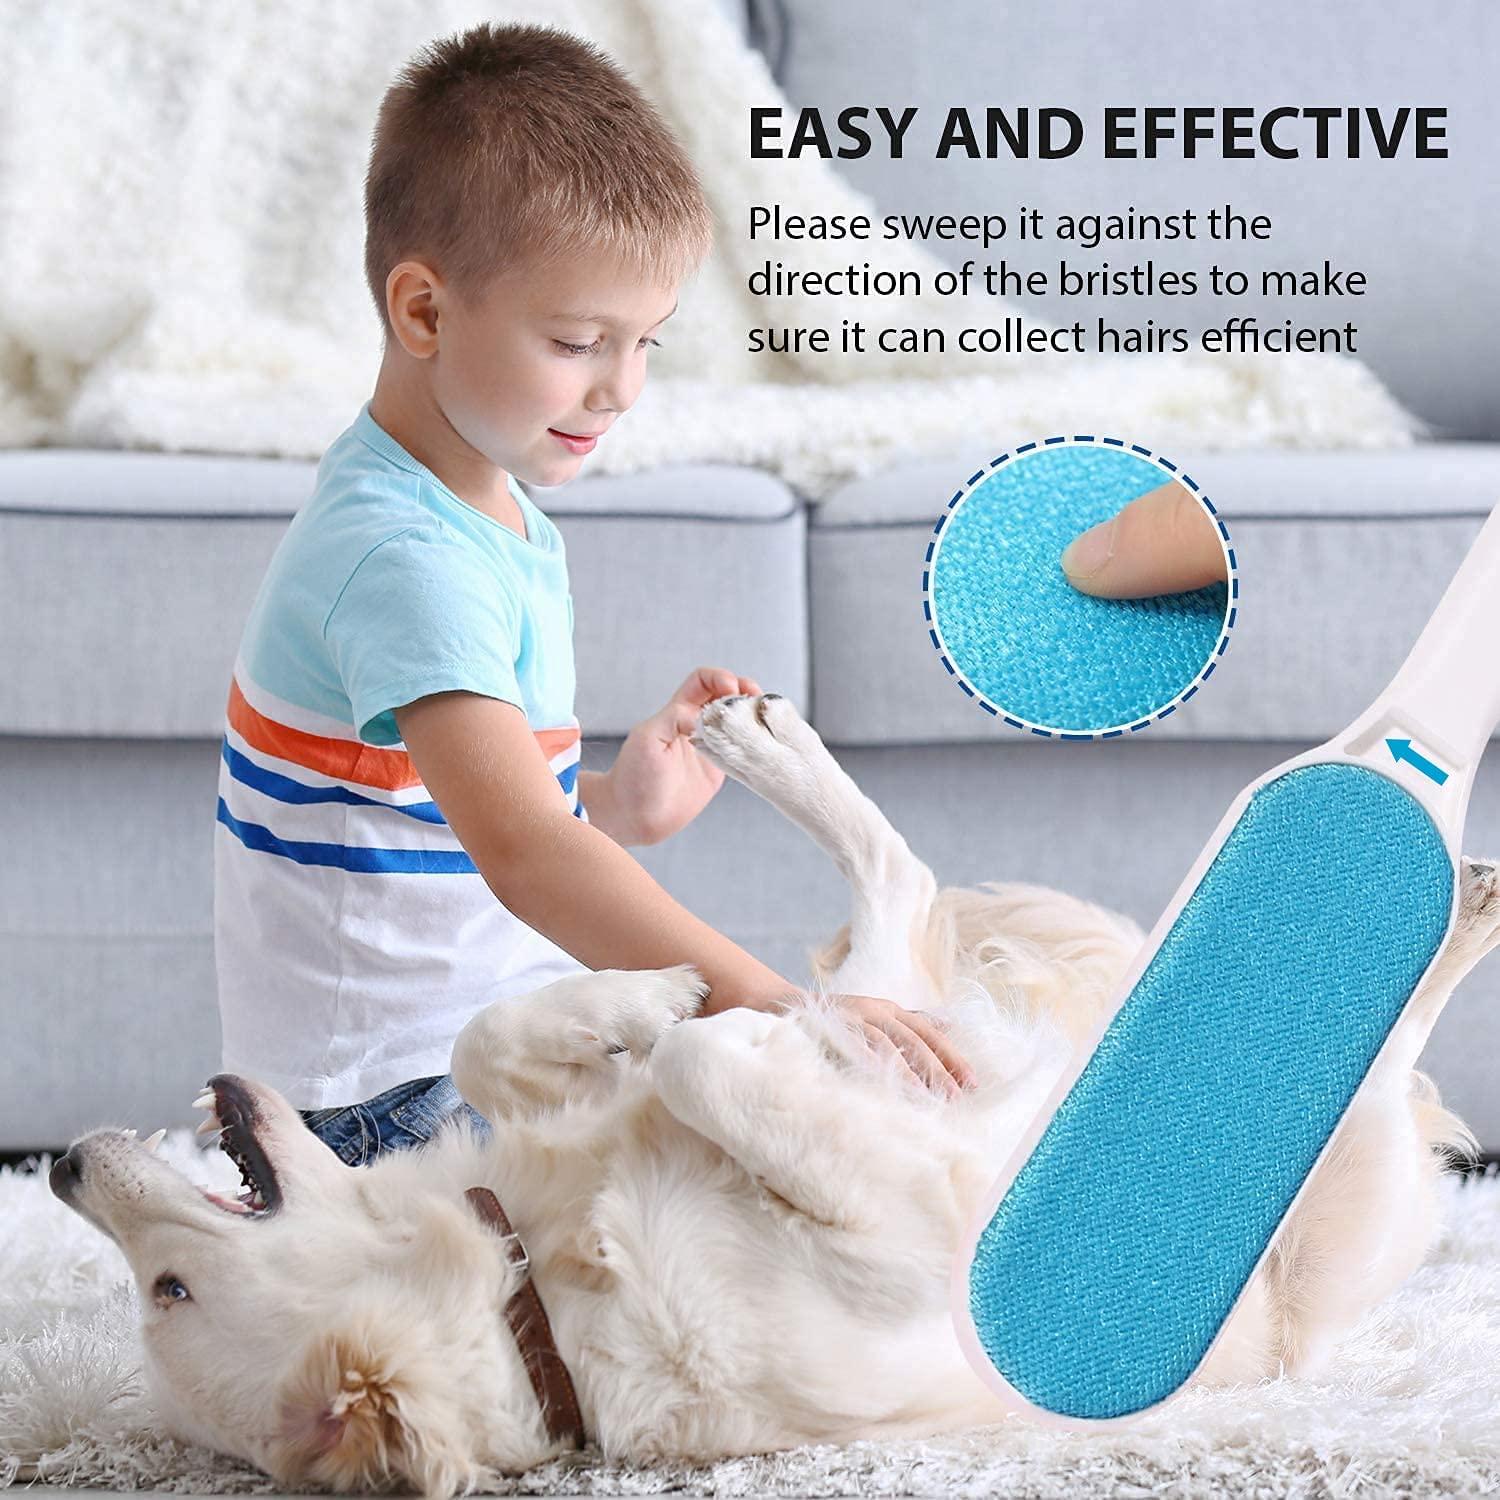 Pet Hair Remover -Dog Hair Remover For Clothes-Better than Lint Rollers for  Pet Hair, Dog Hair Remover- Lint Remover Brush - Remove Cat and Dog Hair,  Lint from Clothing, Couch, Furniture, Bedding